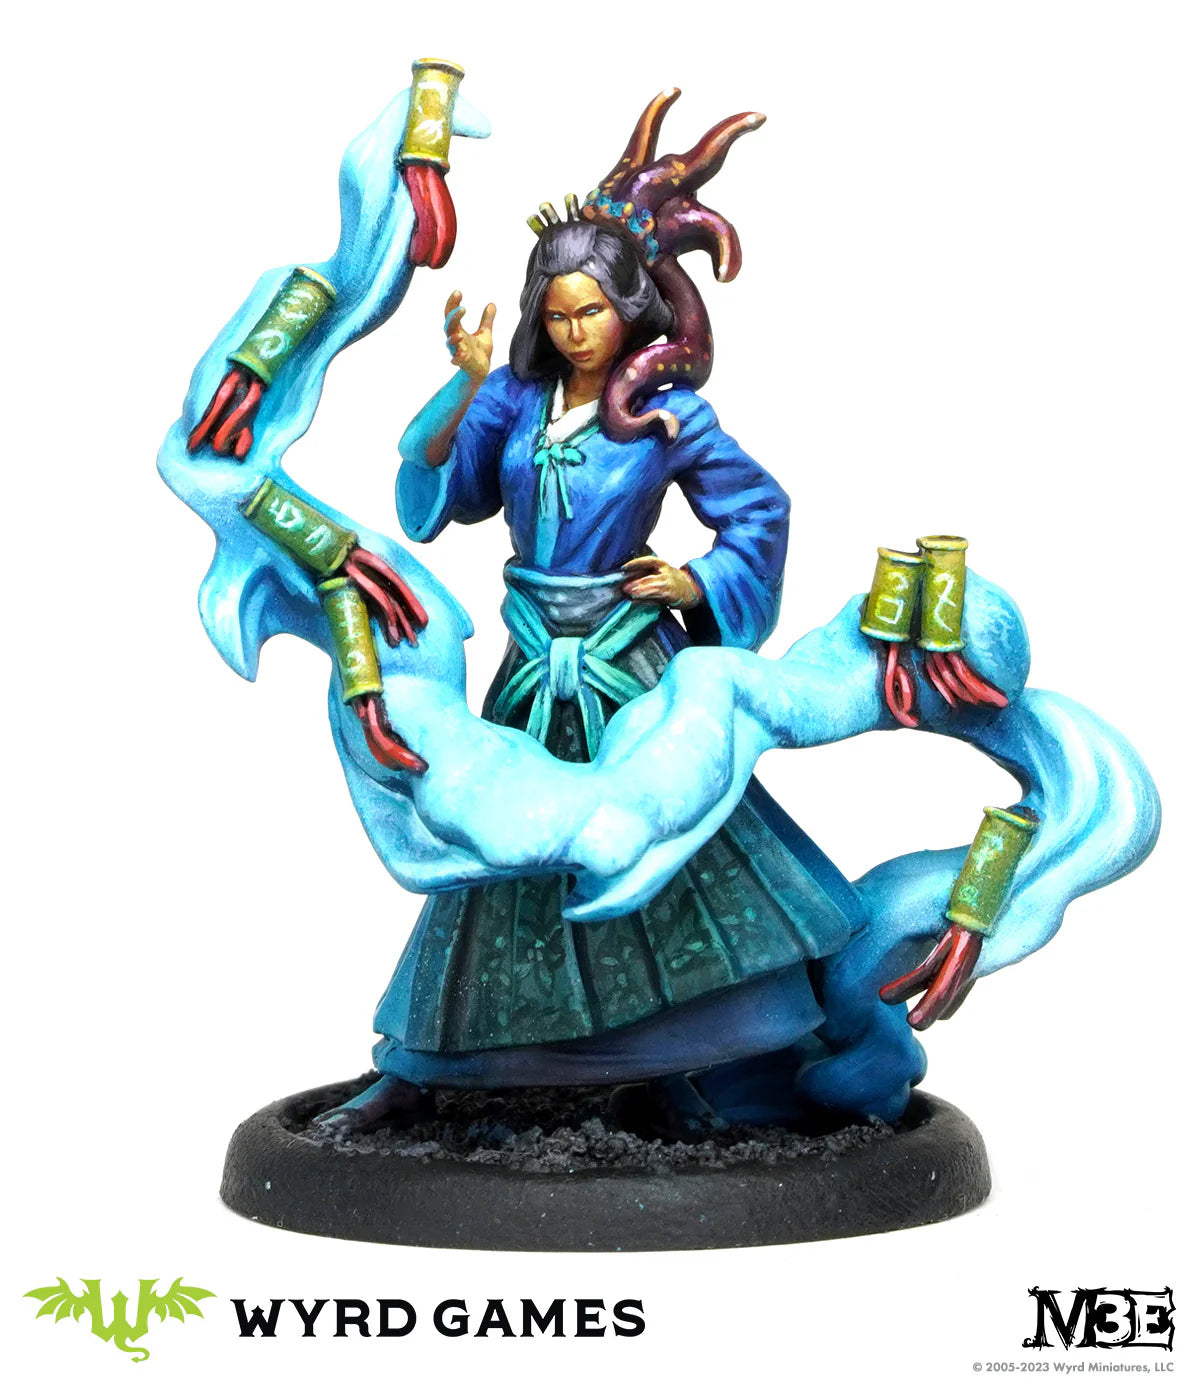 Malifaux: Neverborn & Ten Thunders: Realm Beyond